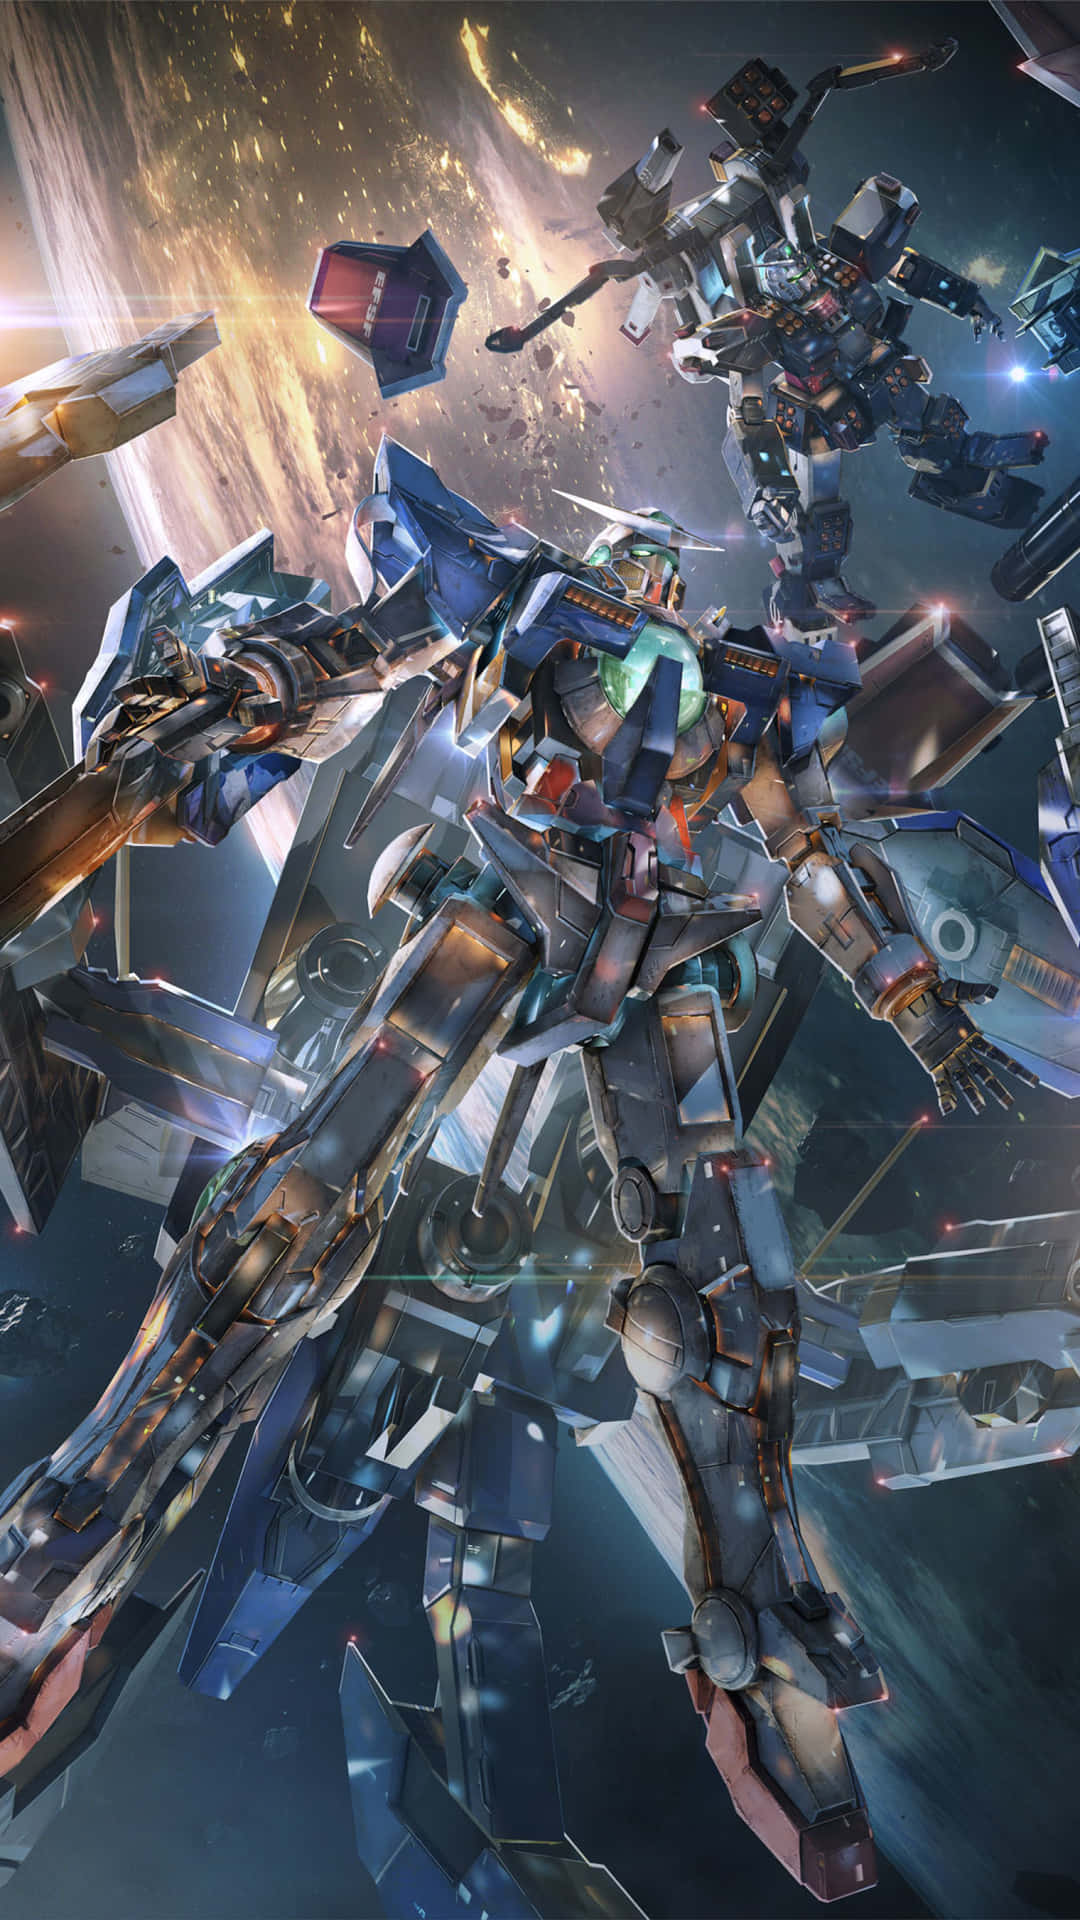 Engage&Destroy in the Universe with High-Performance Mobile Suits: Gundam